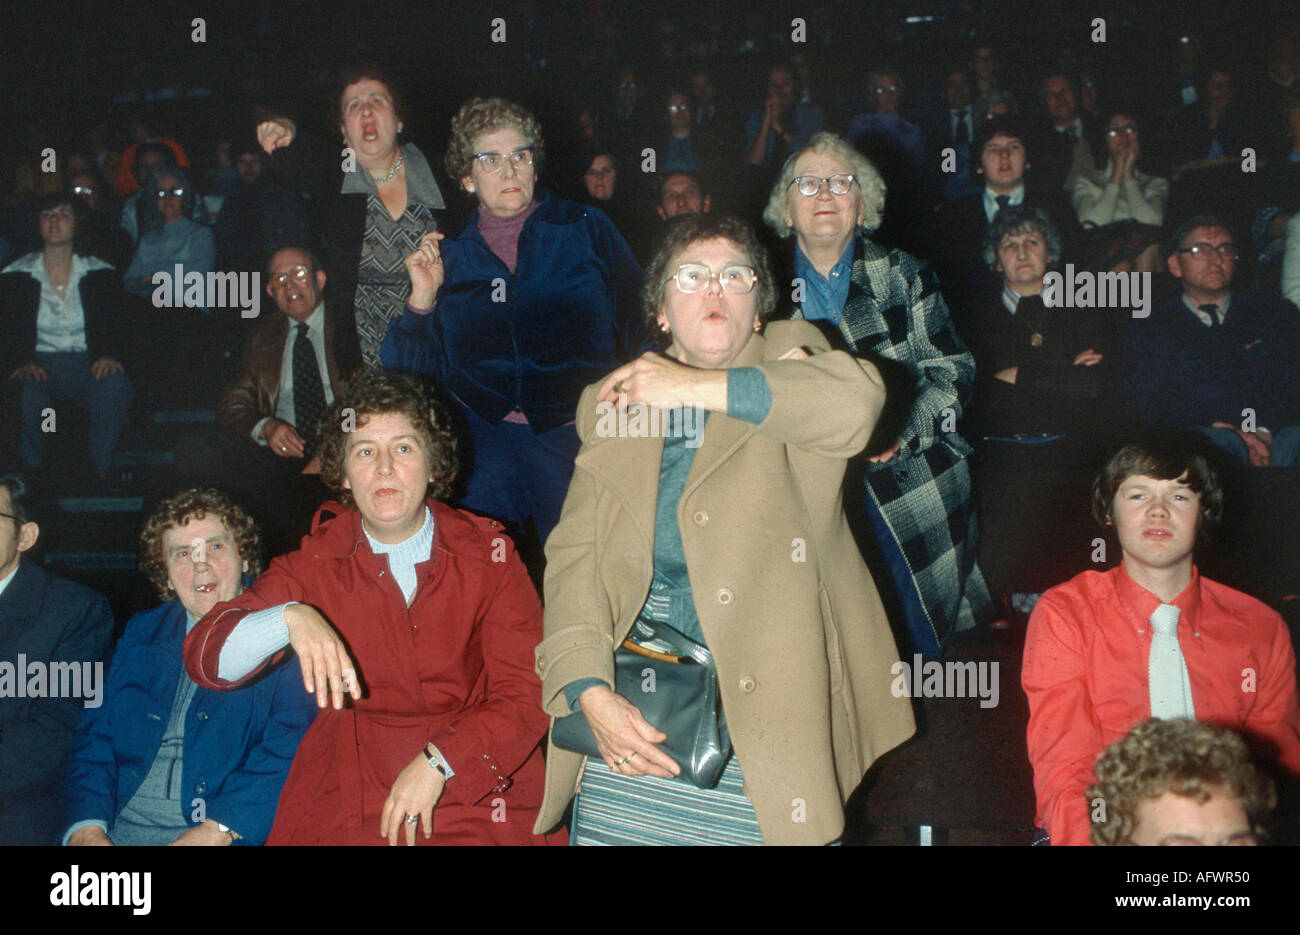 Middle aged women cheering on their man at an All in Wrestling match.  Booing the opponent. The Assembly Rooms, Derby Derbyshire 1980  HOMER SYKES Stock Photo